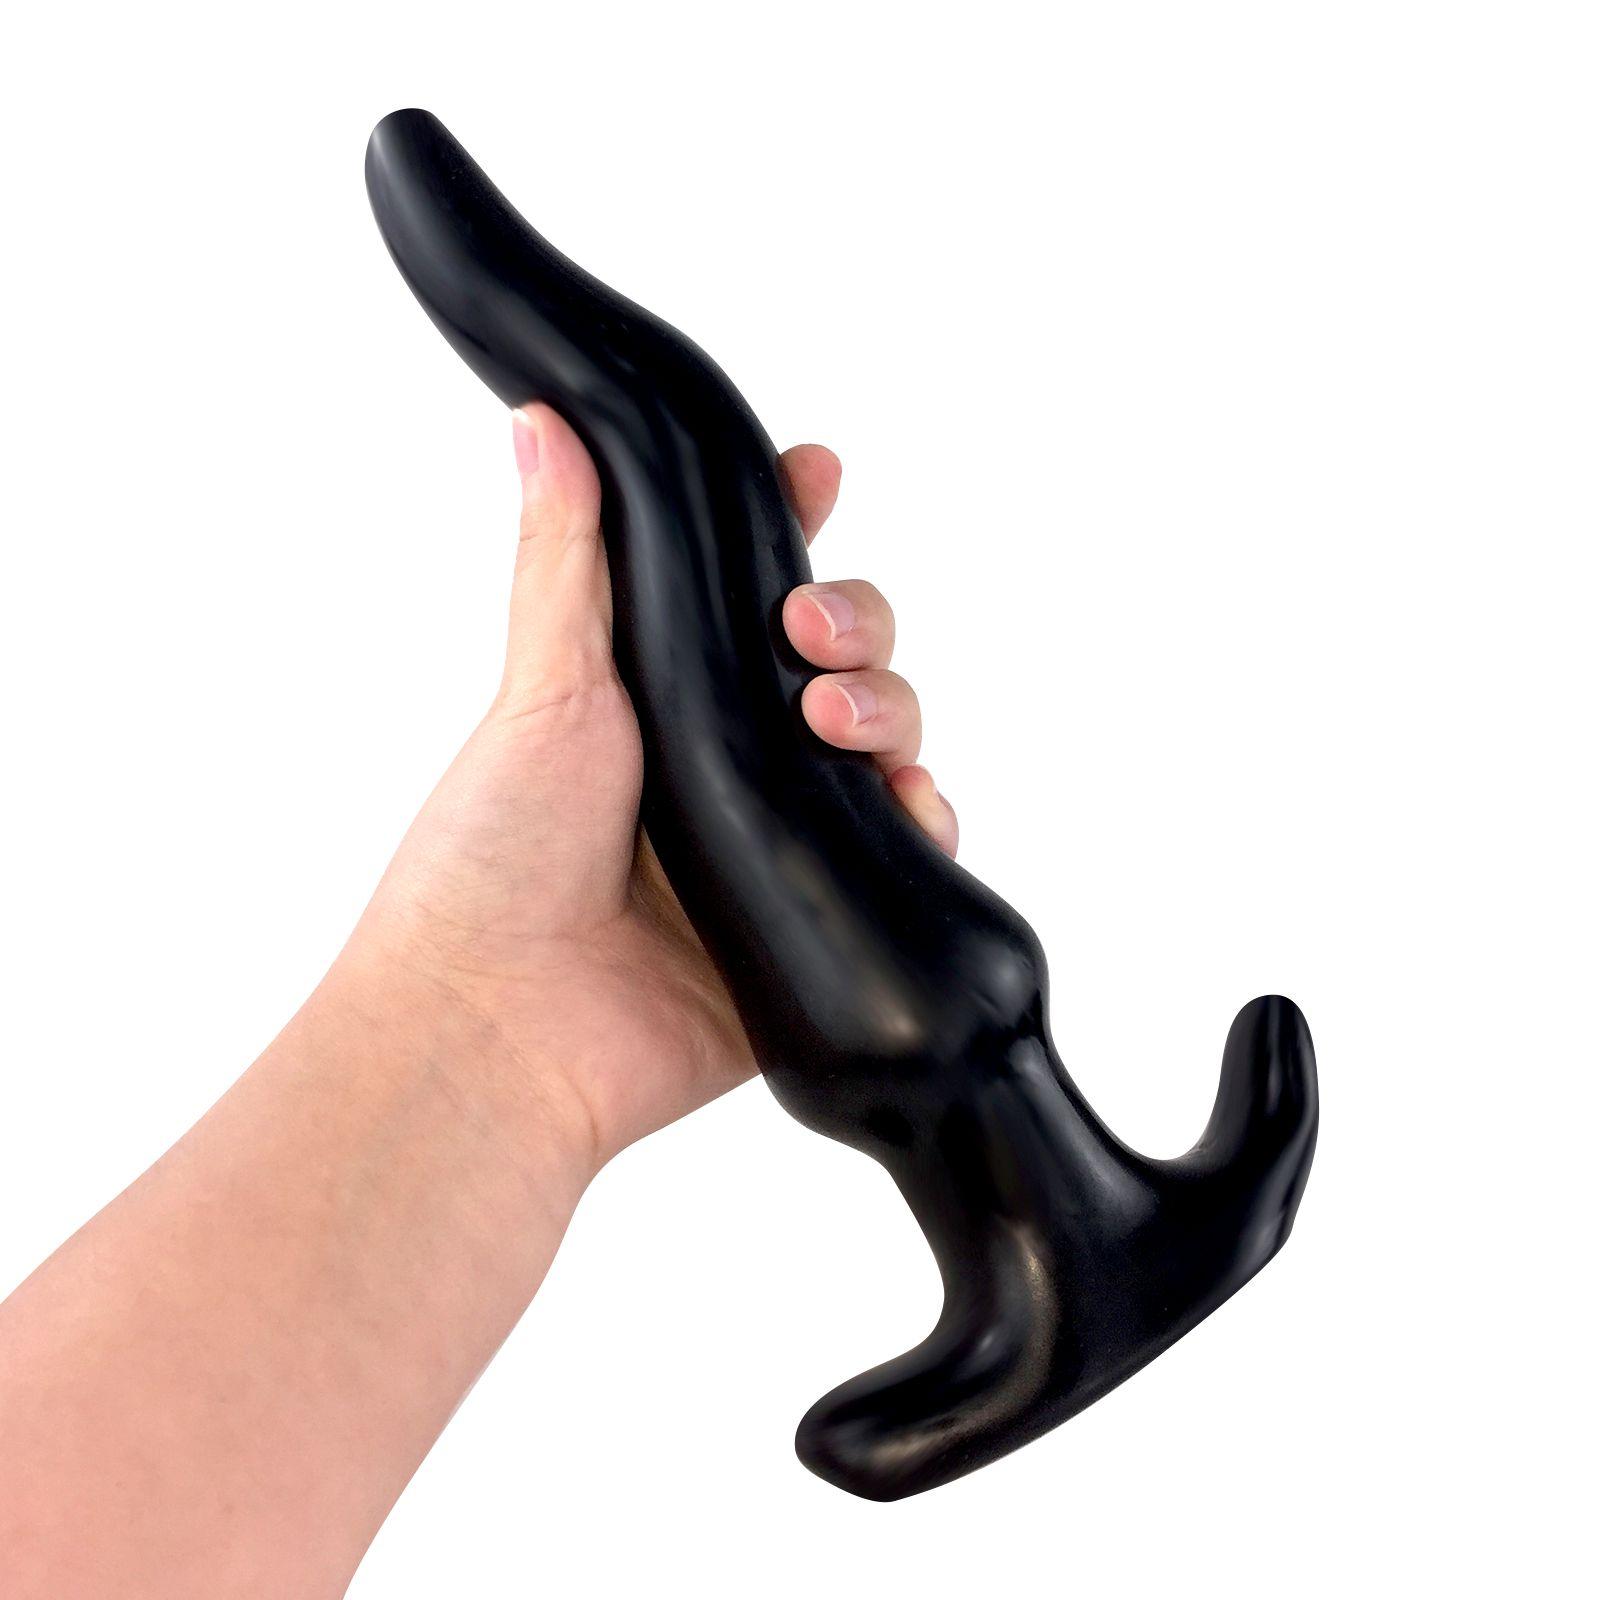 15-25cm Super Long Crooked Finger Anal Toy Anus Intercourse Whip Butt Plug Sex Toy For Women Men Gay Lesbian Couple Xxx Play